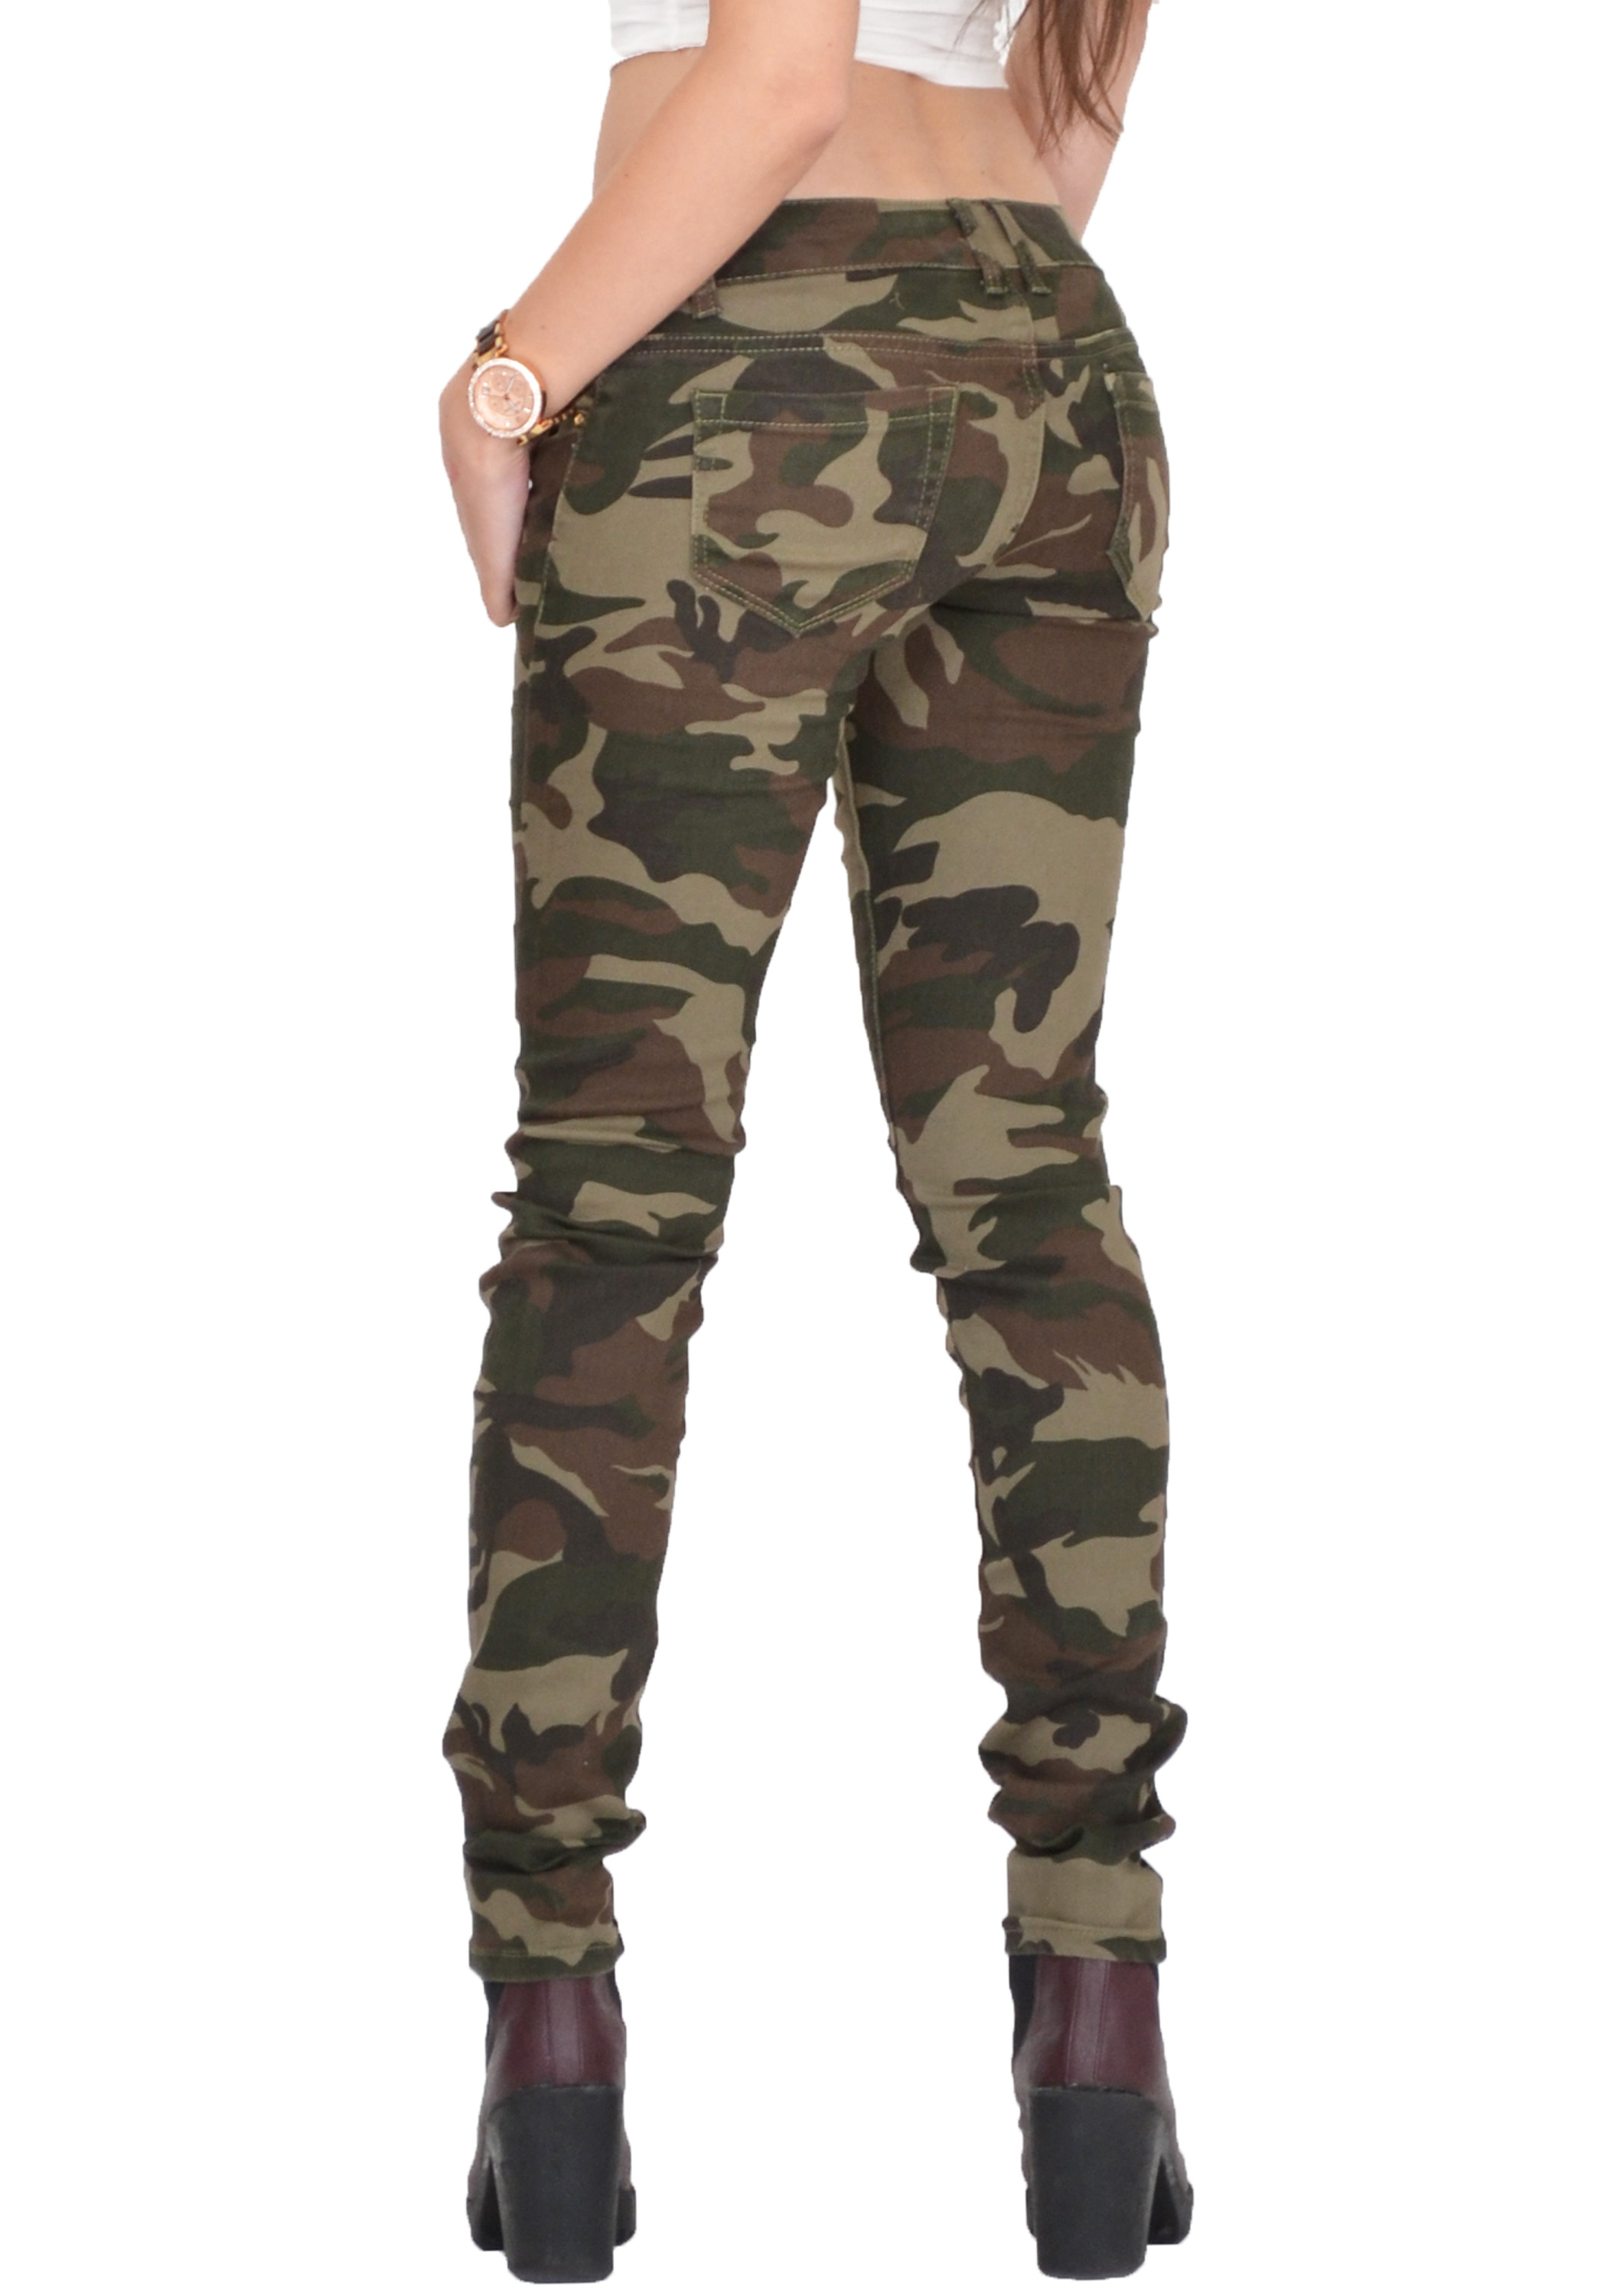 Womens Army Military Green Camouflage Skinny Slim Stretch Jeans Pants